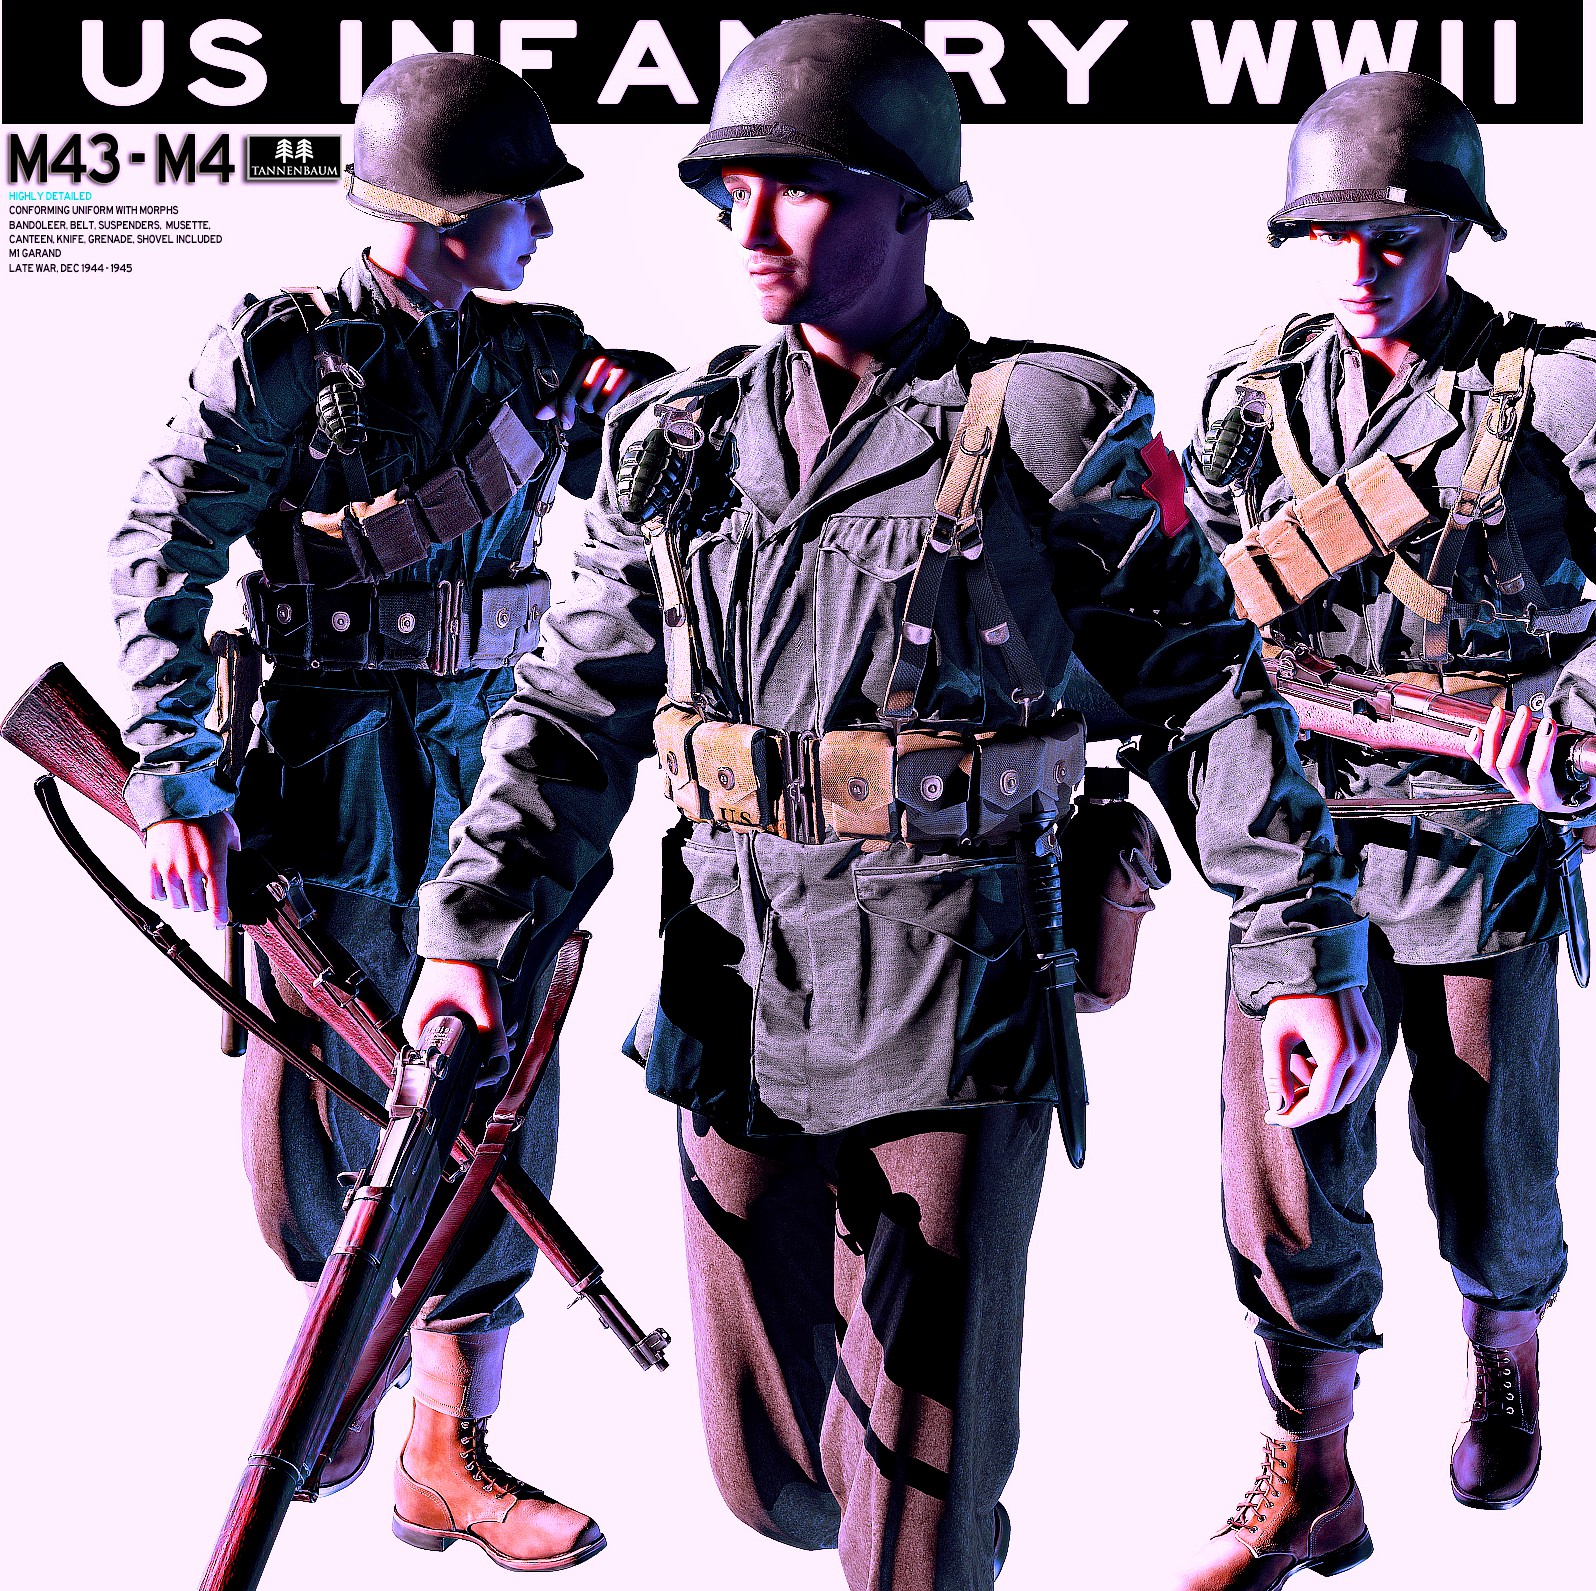 US Infantry WWII M43